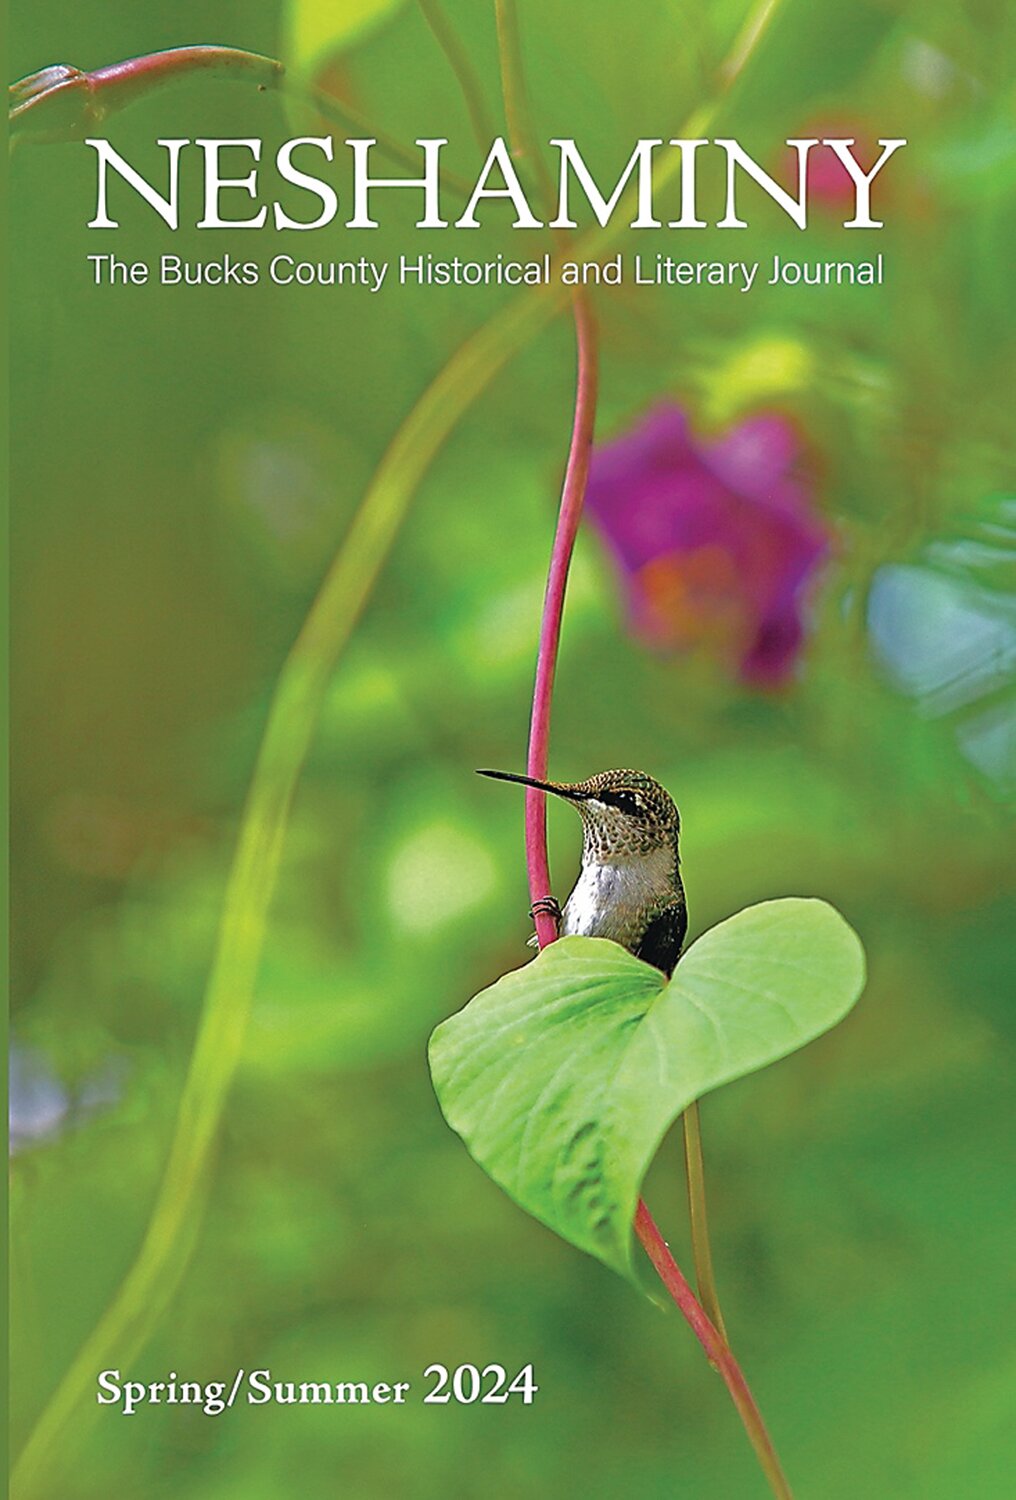 The Spring/Summer 2024 issue of “Neshaminy, the Bucks County Historical and Literary Journal” is out.